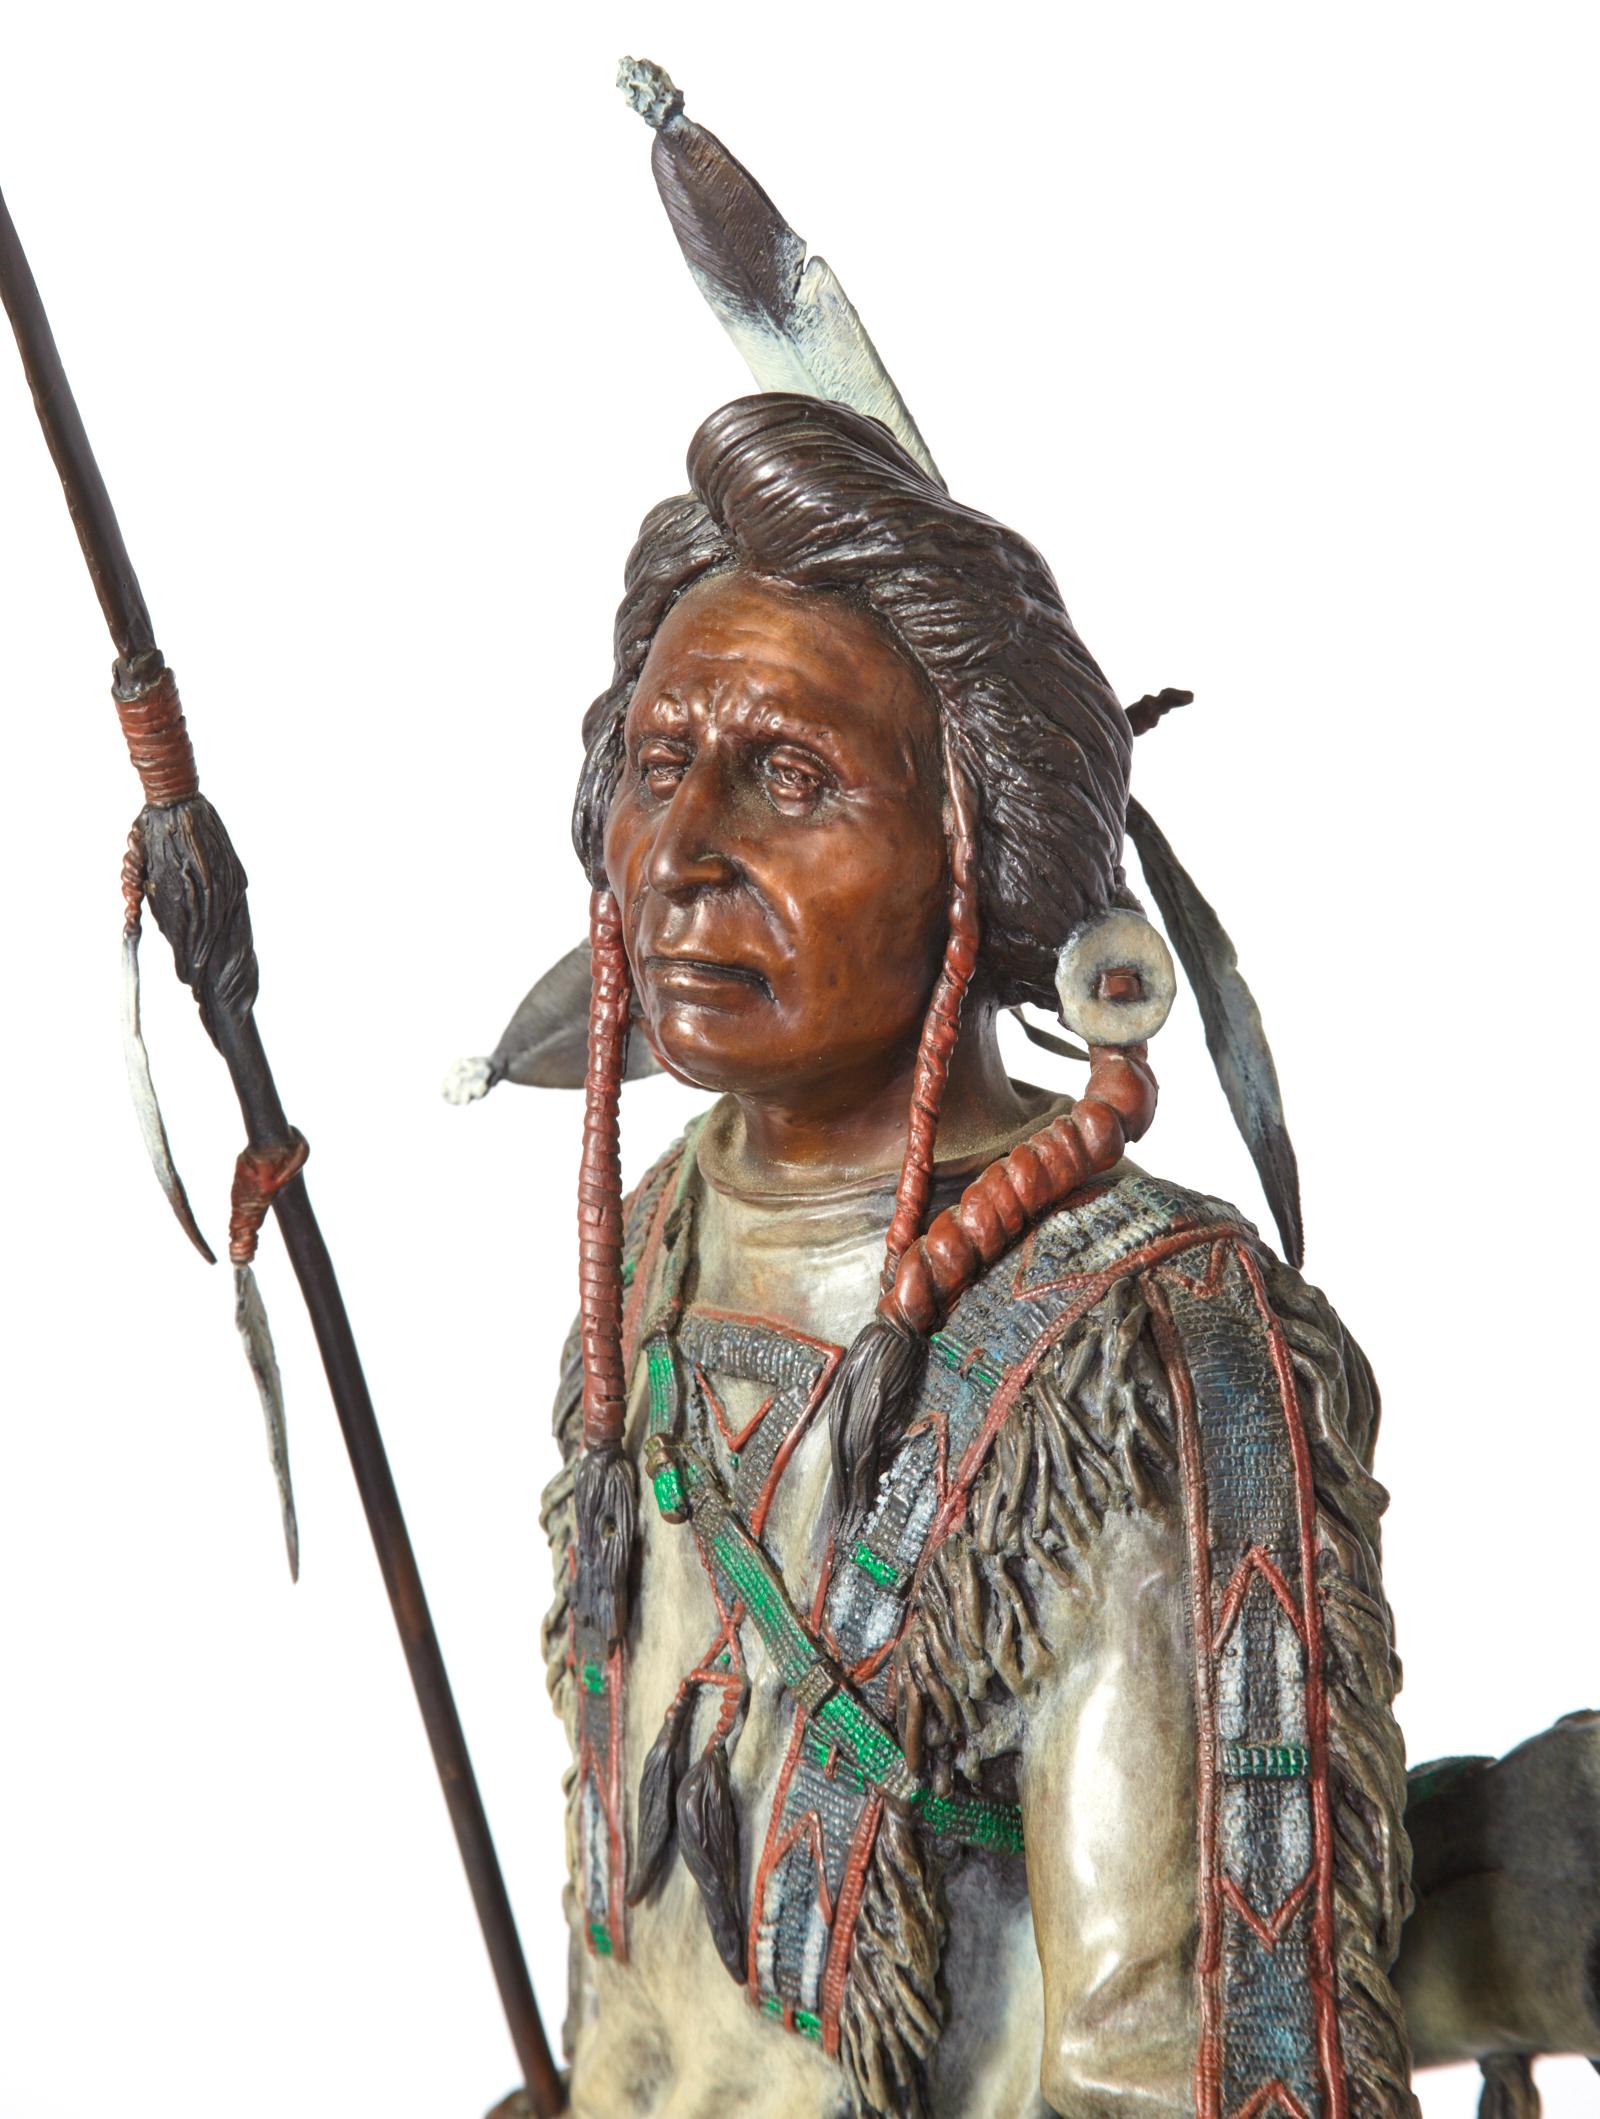 'Silent Sentinel' circa 1996 is a painted bronze figure by James Regimbal depicting a strong and self assured Indian warrior. This powerful piece is in excellent condition and stands 30